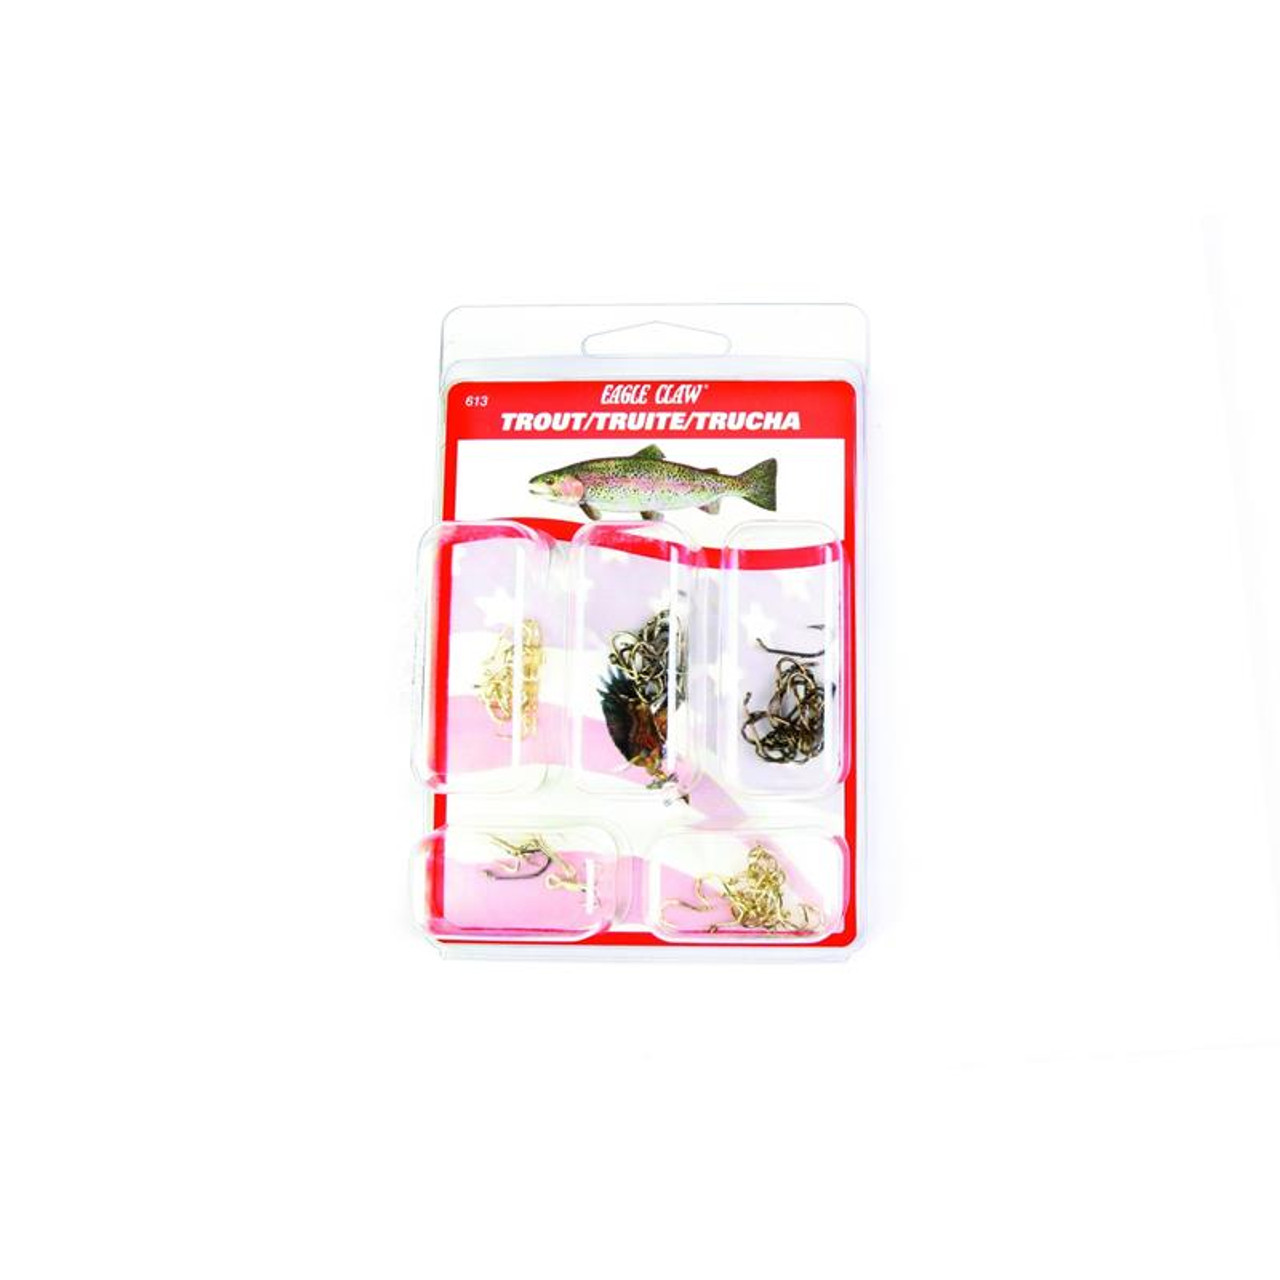 Eagle Claw Trout Hook Assortment